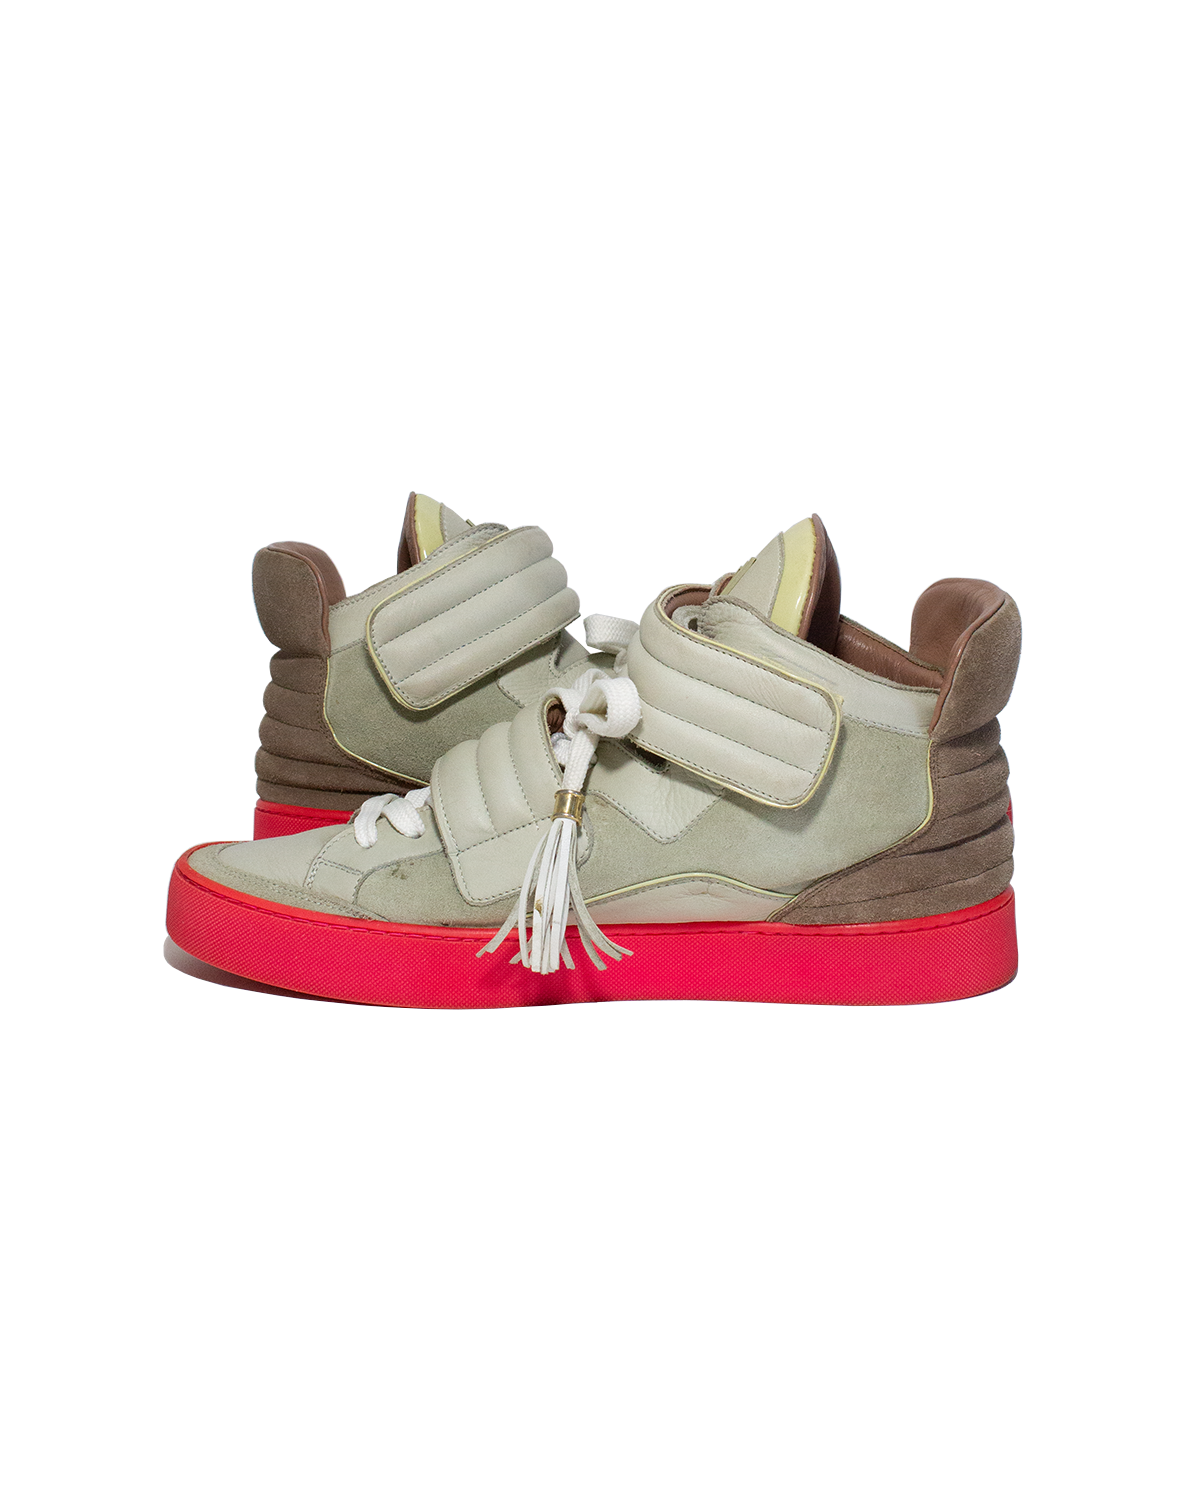 For Sale!!! Louis Vuitton Jaspers (Kanye Patchwork) Used 9/10